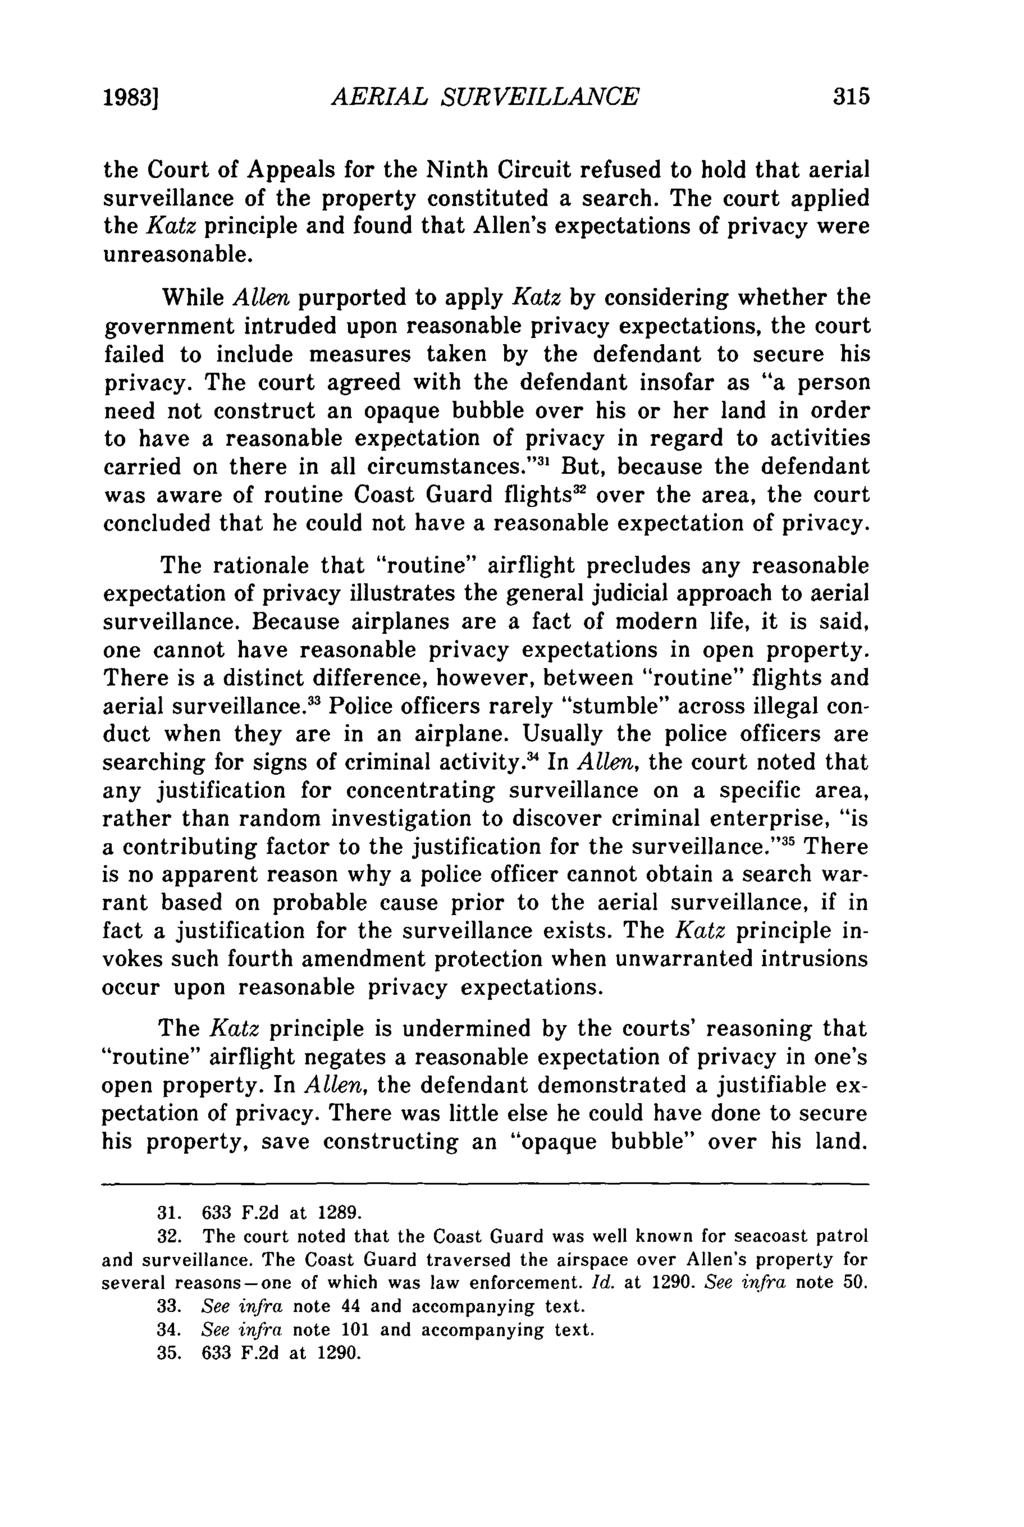 19831 Horvath: Fourth Amendment Implications of Warrantless Aerial Surveillance AERIAL SURVEILLANCE the Court of Appeals for the Ninth Circuit refused to hold that aerial surveillance of the property